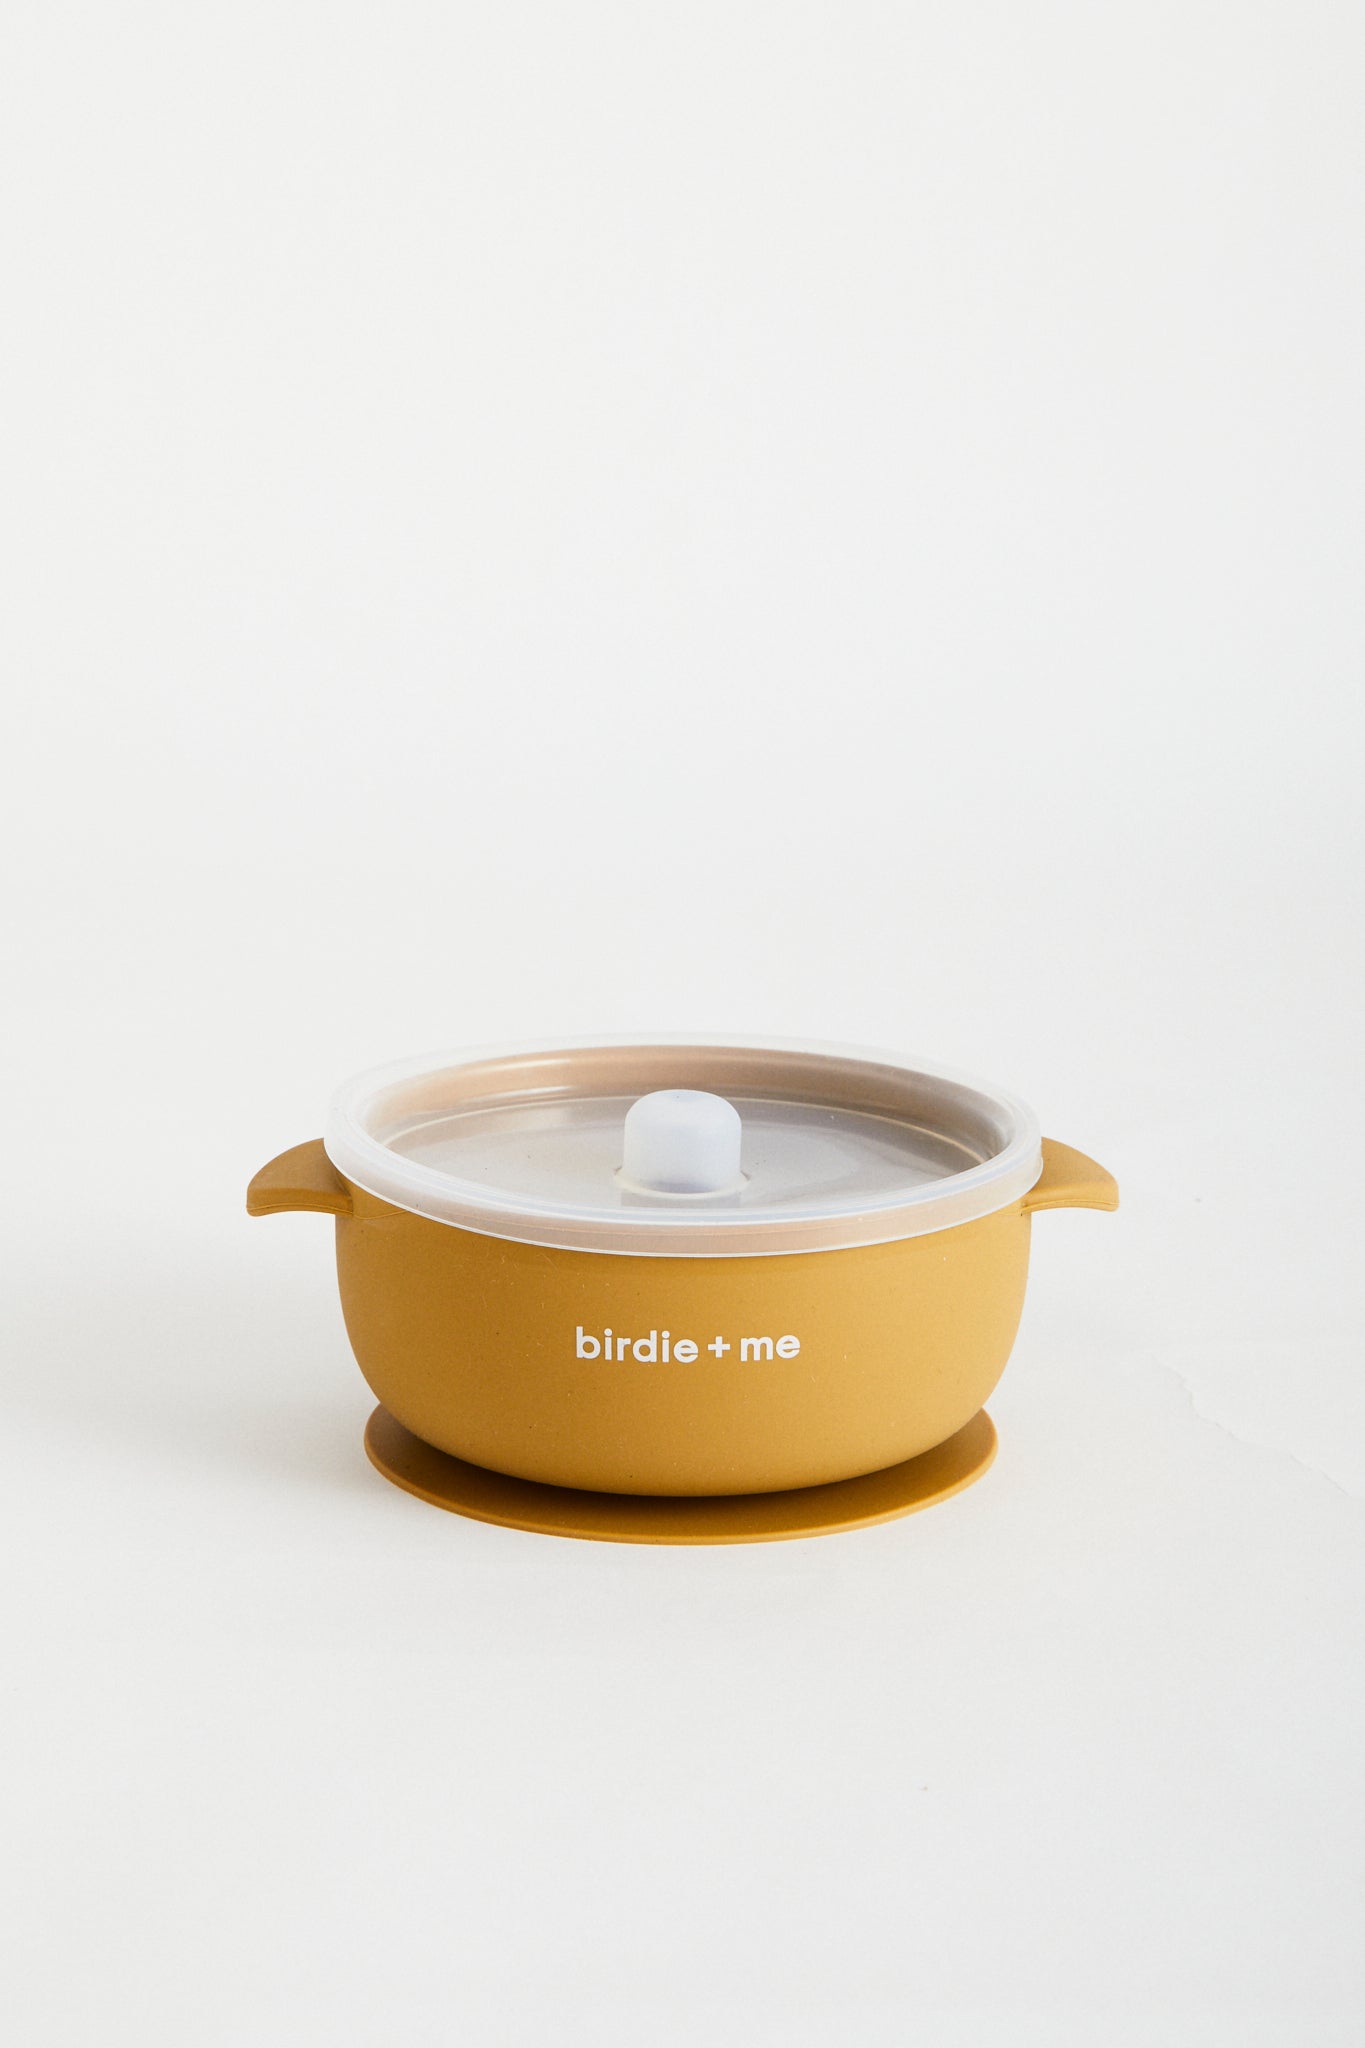 Silicone bowl with suction bottom and lid. Branded with birdie + me logo.